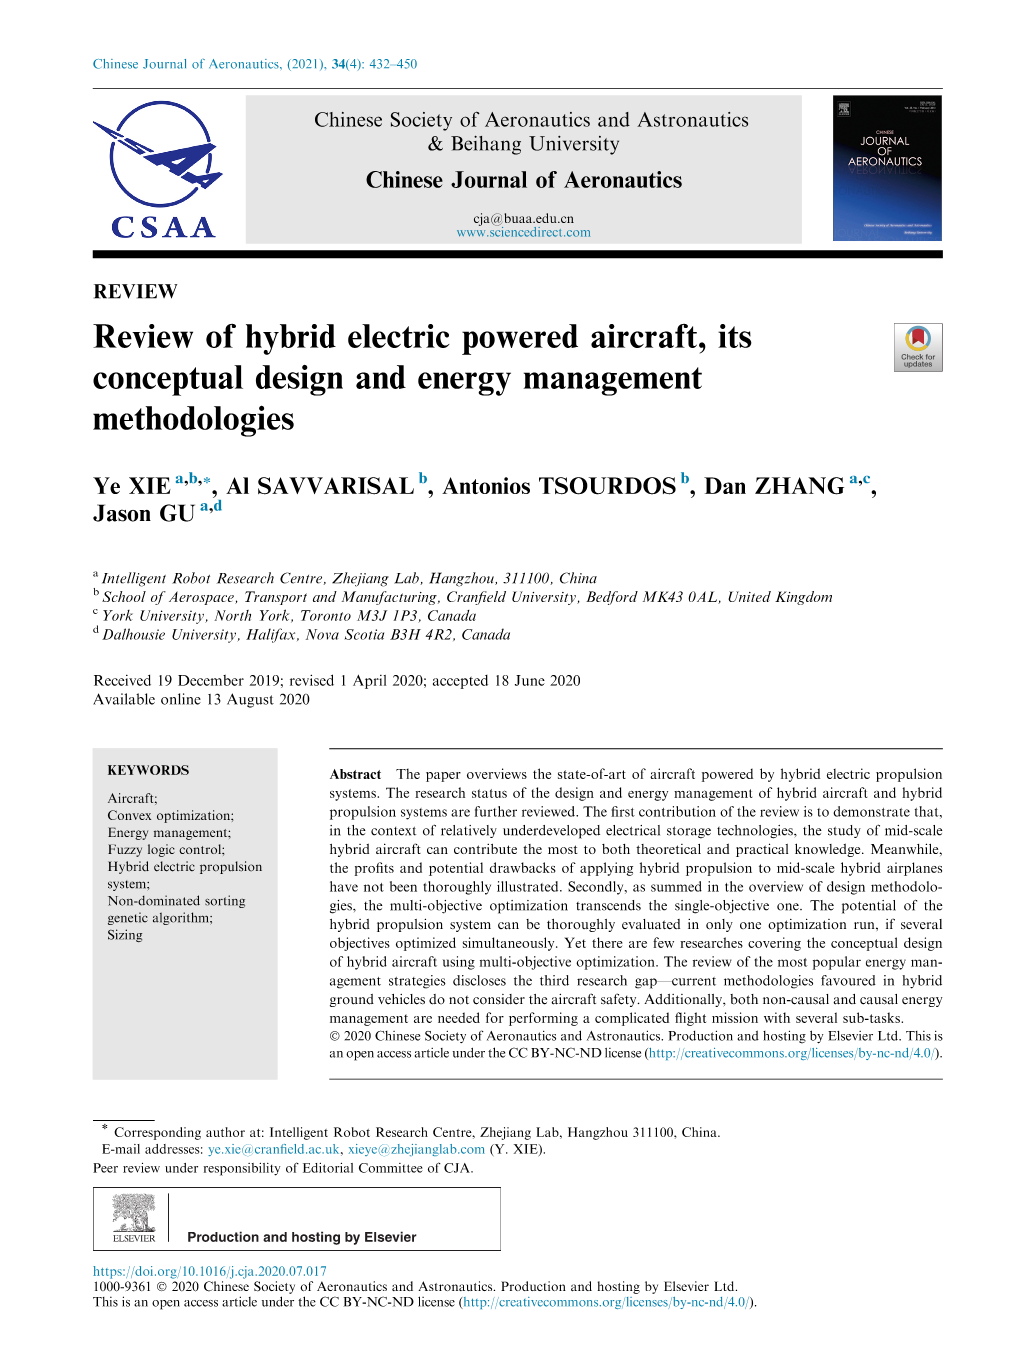 Review of Hybrid Electric Powered Aircraft, Its Conceptual Design and Energy Management Methodologies